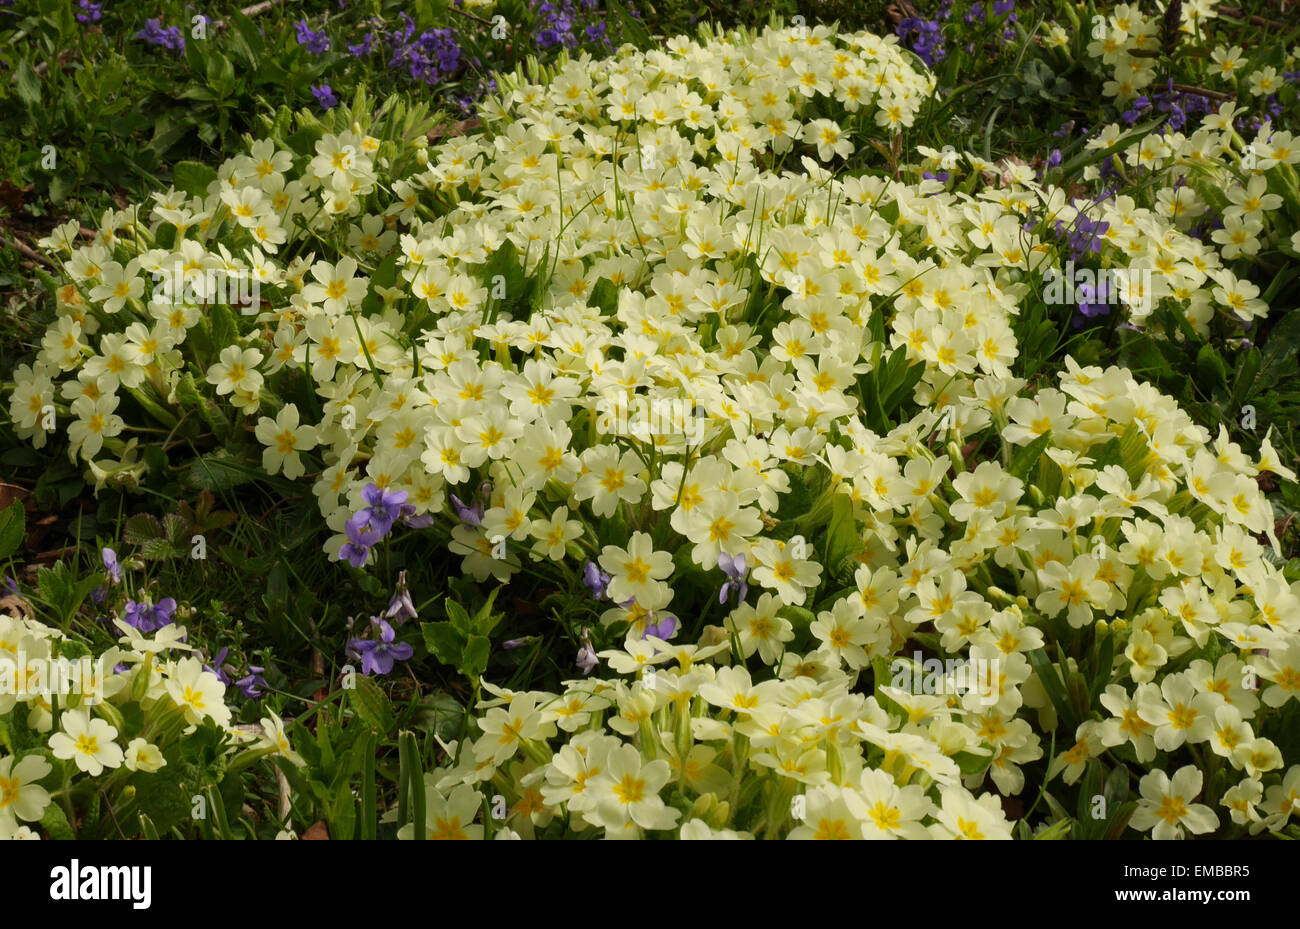 Primroses and Violets in the wild Stock Photo